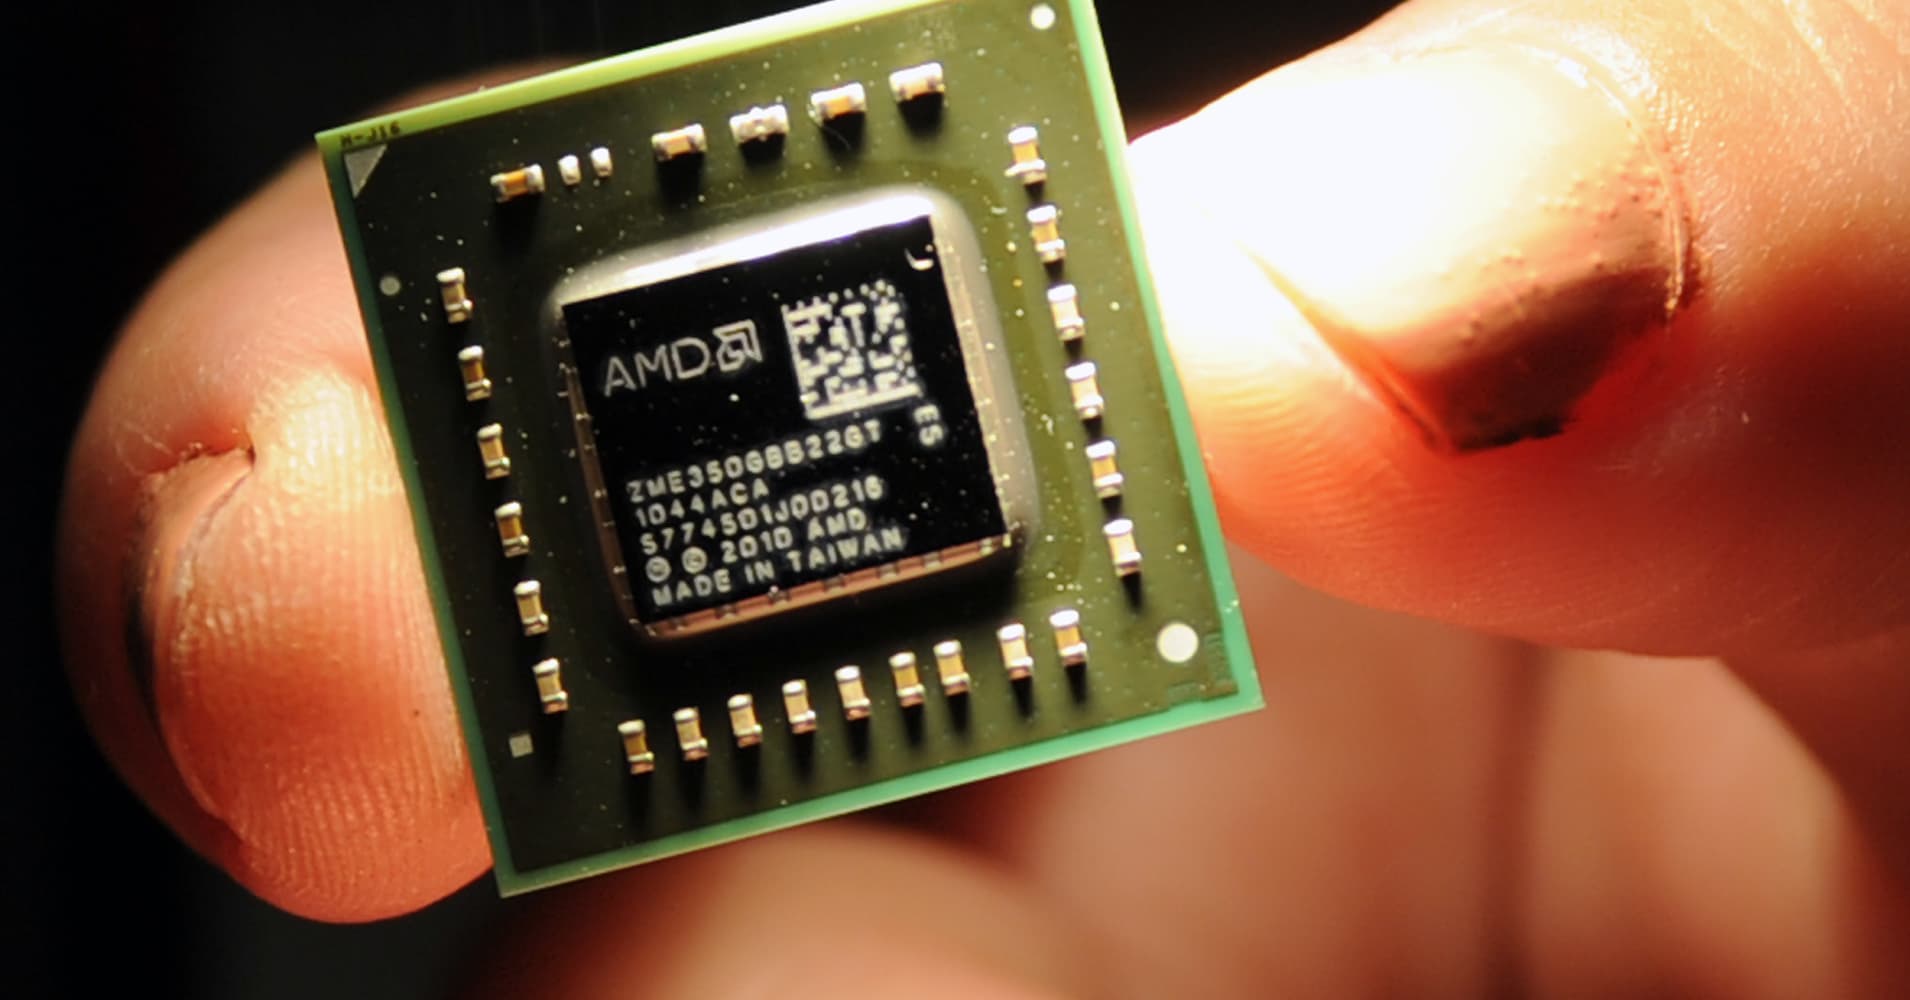 AMD shares rise again as Wall Street projects big gains for the chipmaker against Intel